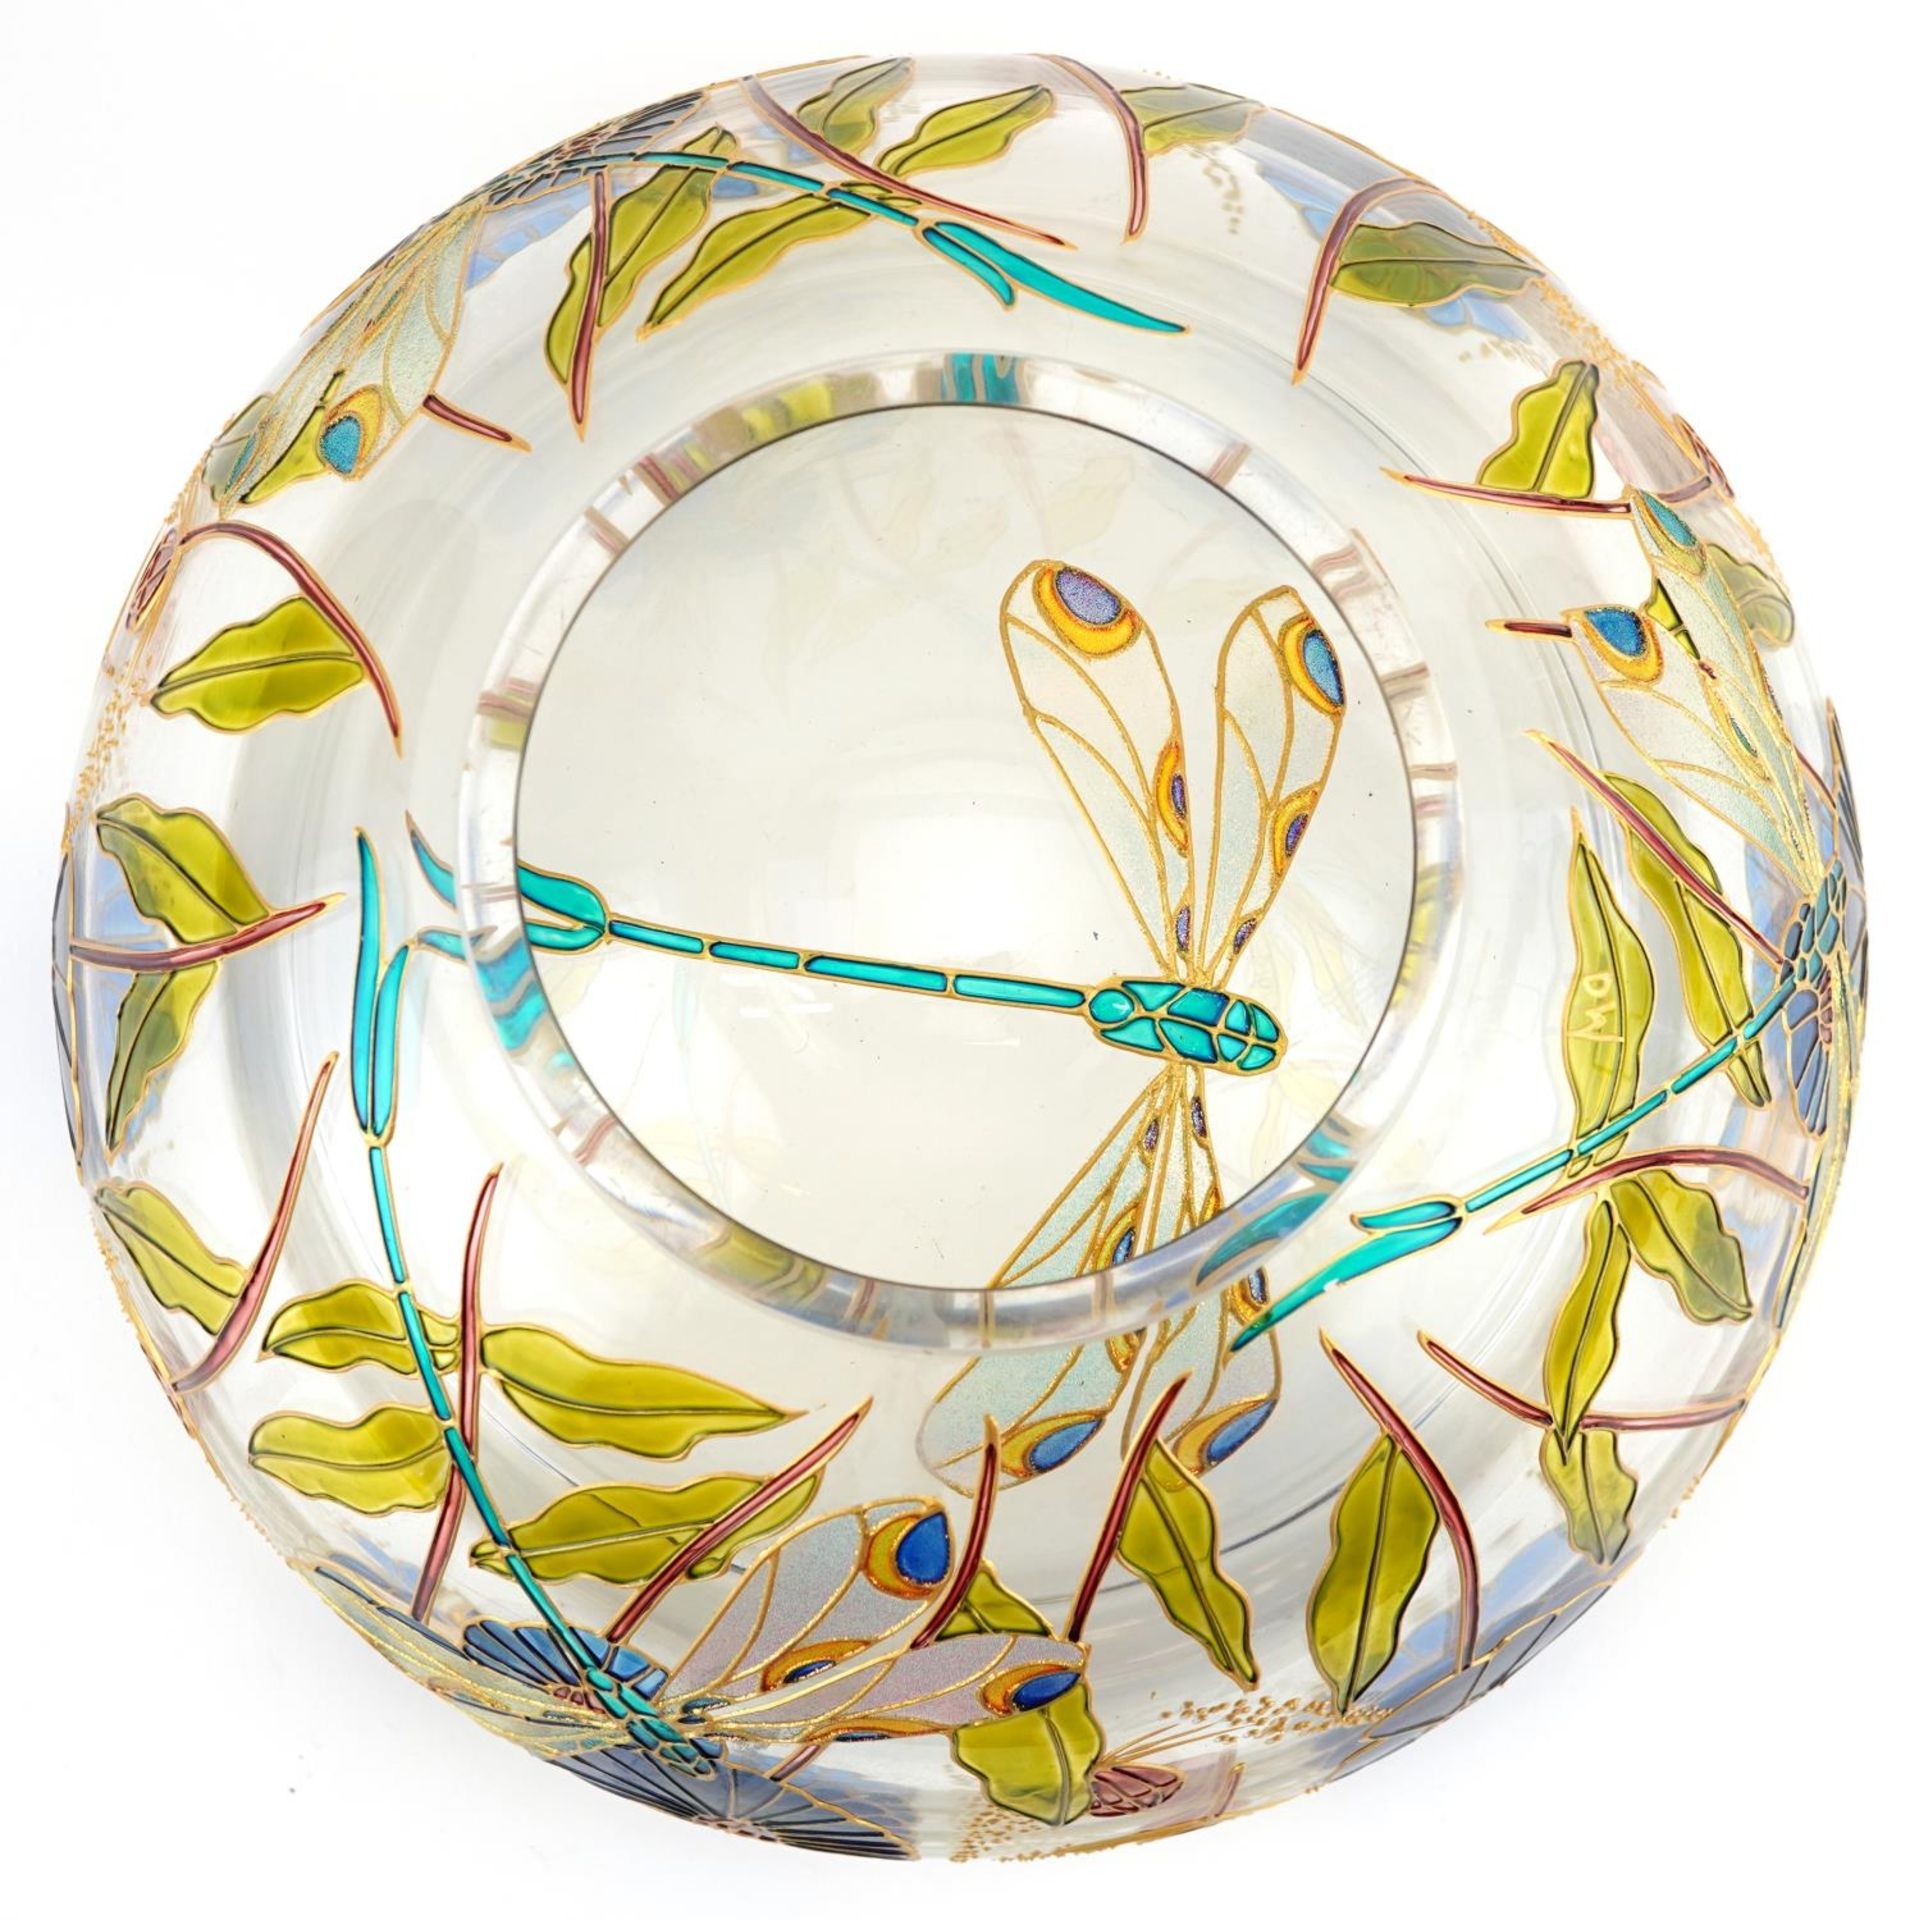 Double walled art glass bowl hand painted with dragonflies amongst flowers, 25.5cm in diameter - Bild 4 aus 5